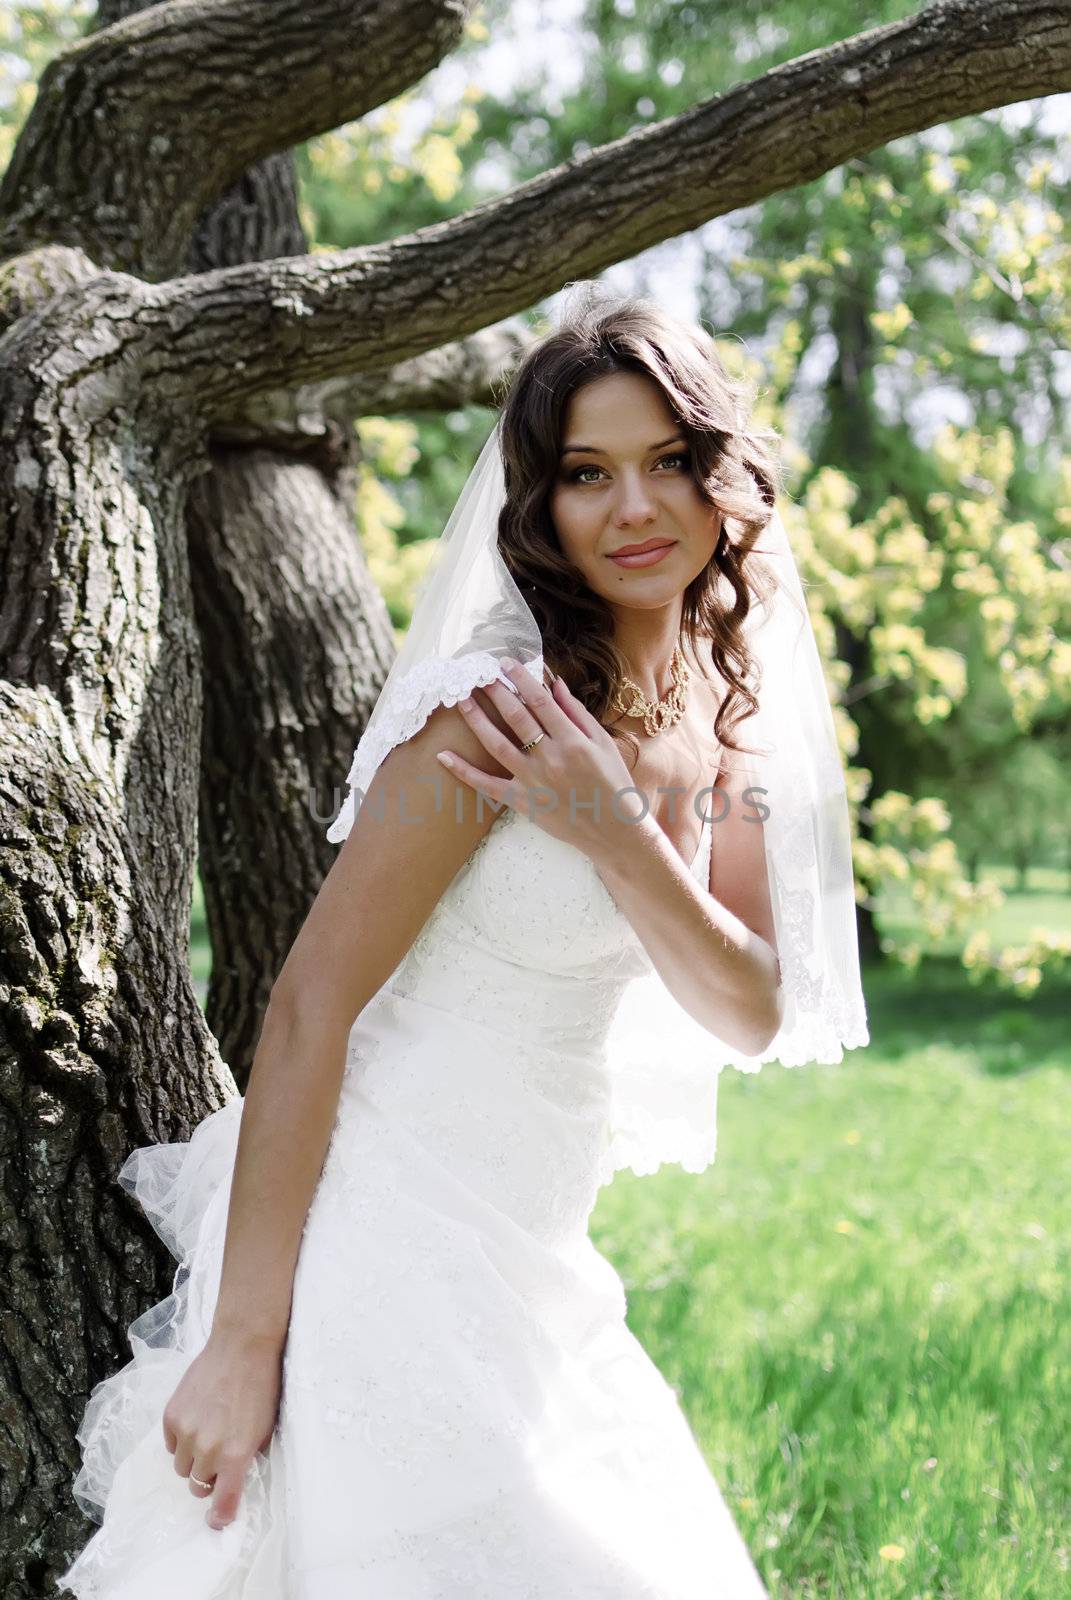 Attractive Bride stands about trees in the park